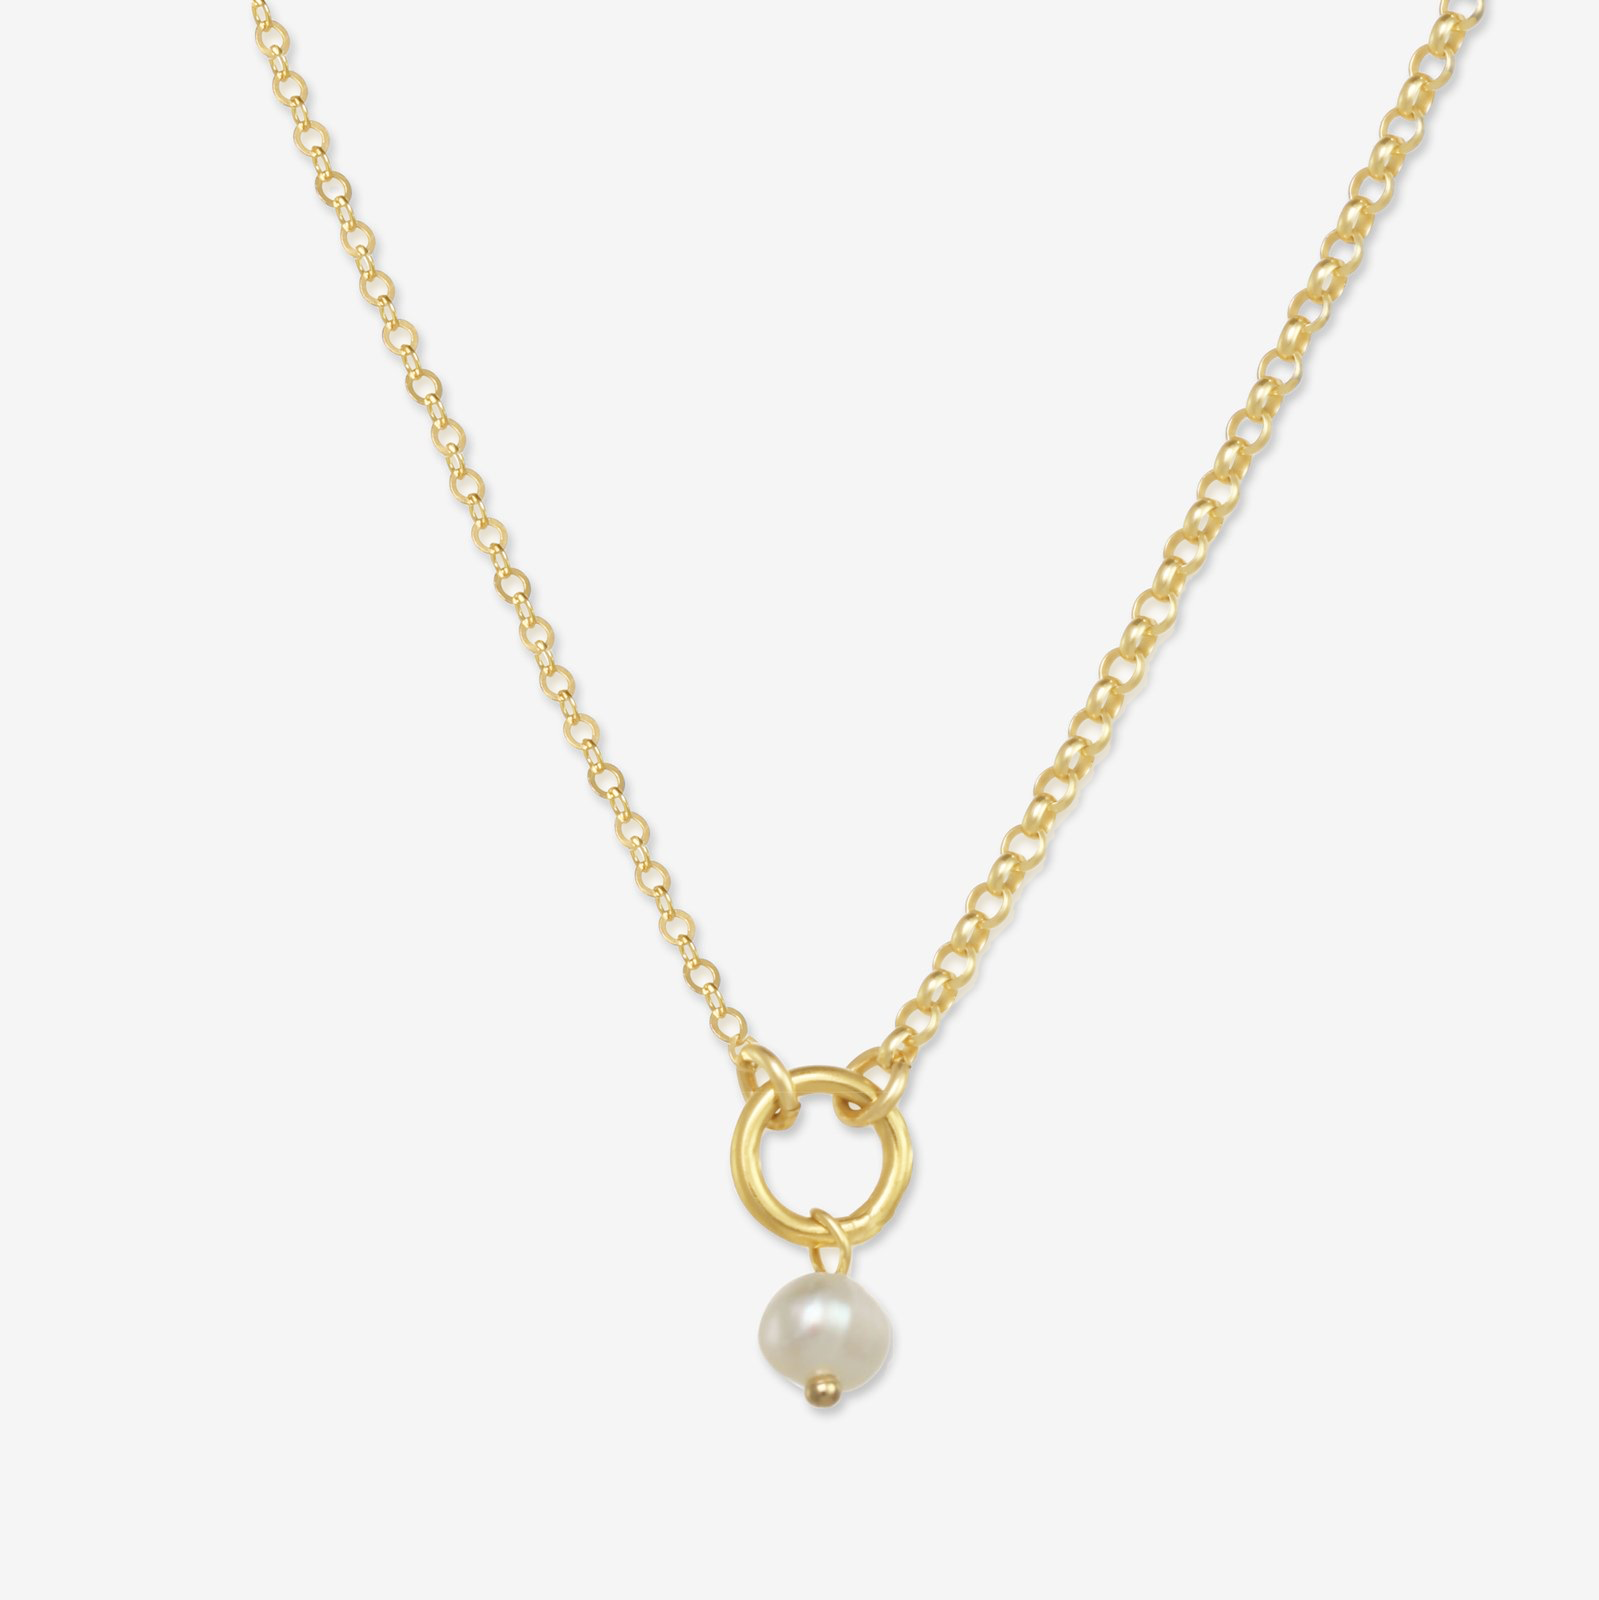 14K Gold-filled Chain Divya Necklace | The Jewelry Edit